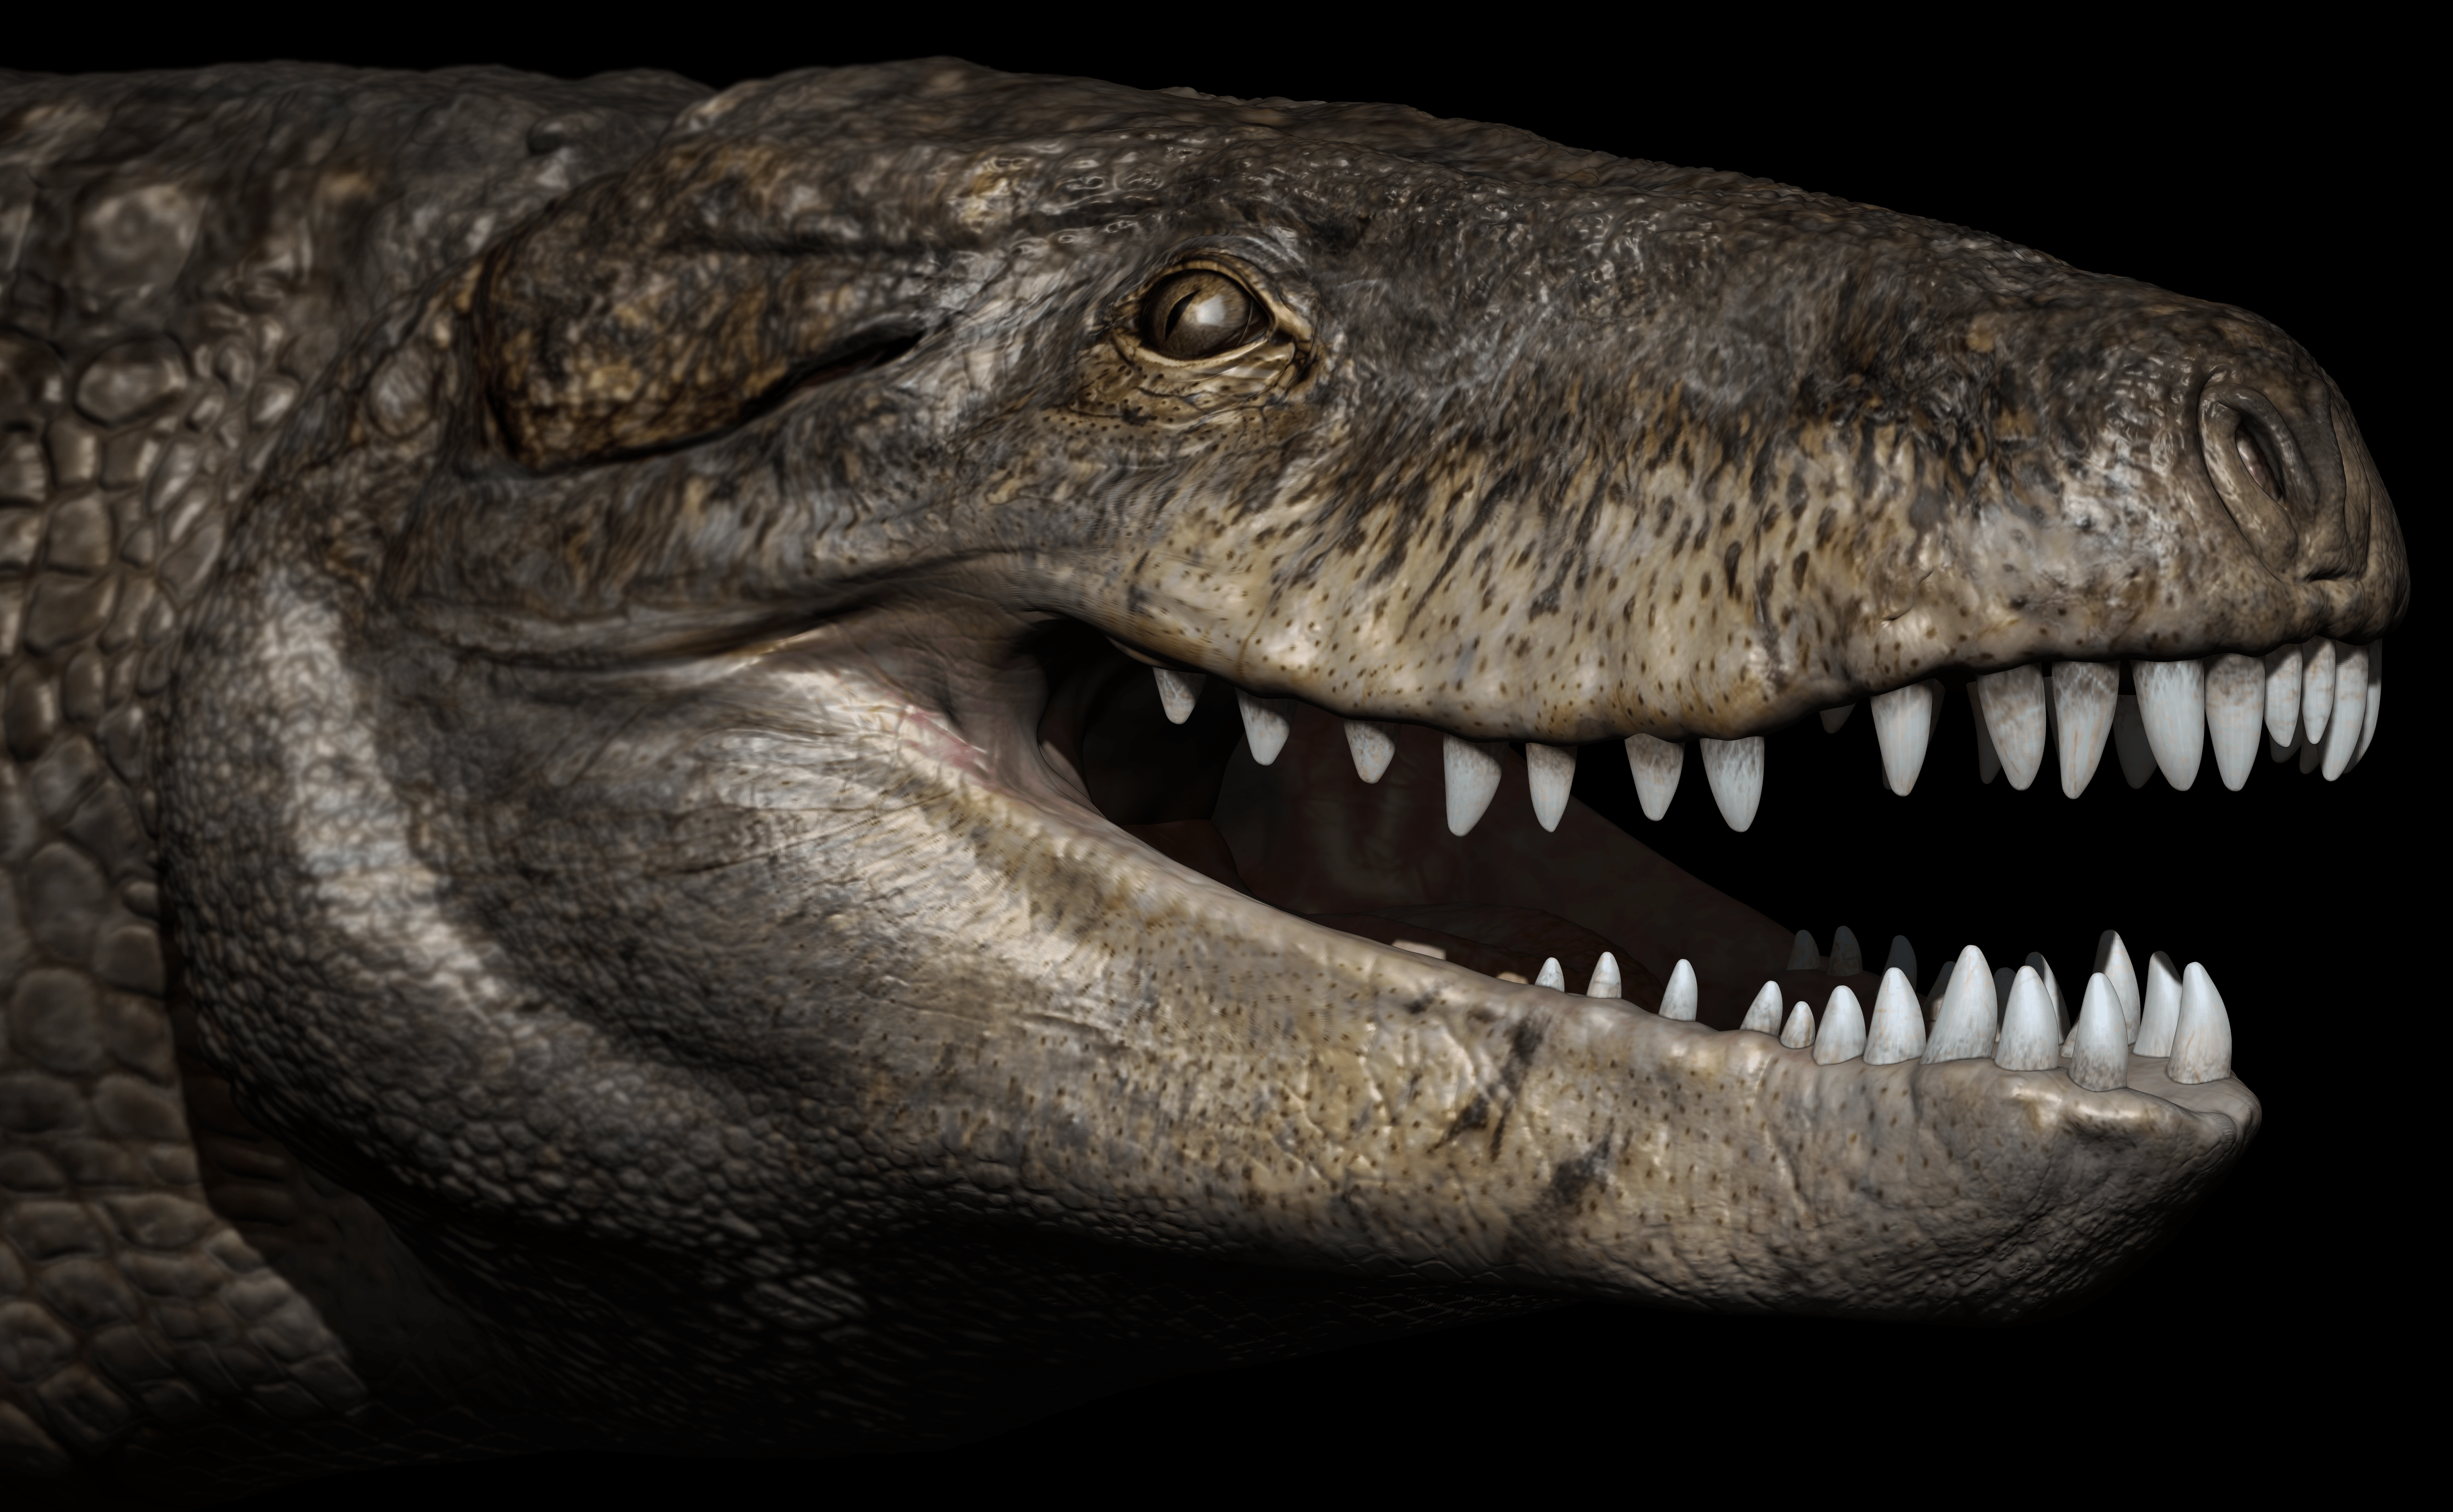 This ancient one-ton crocodile had steak knives for teeth